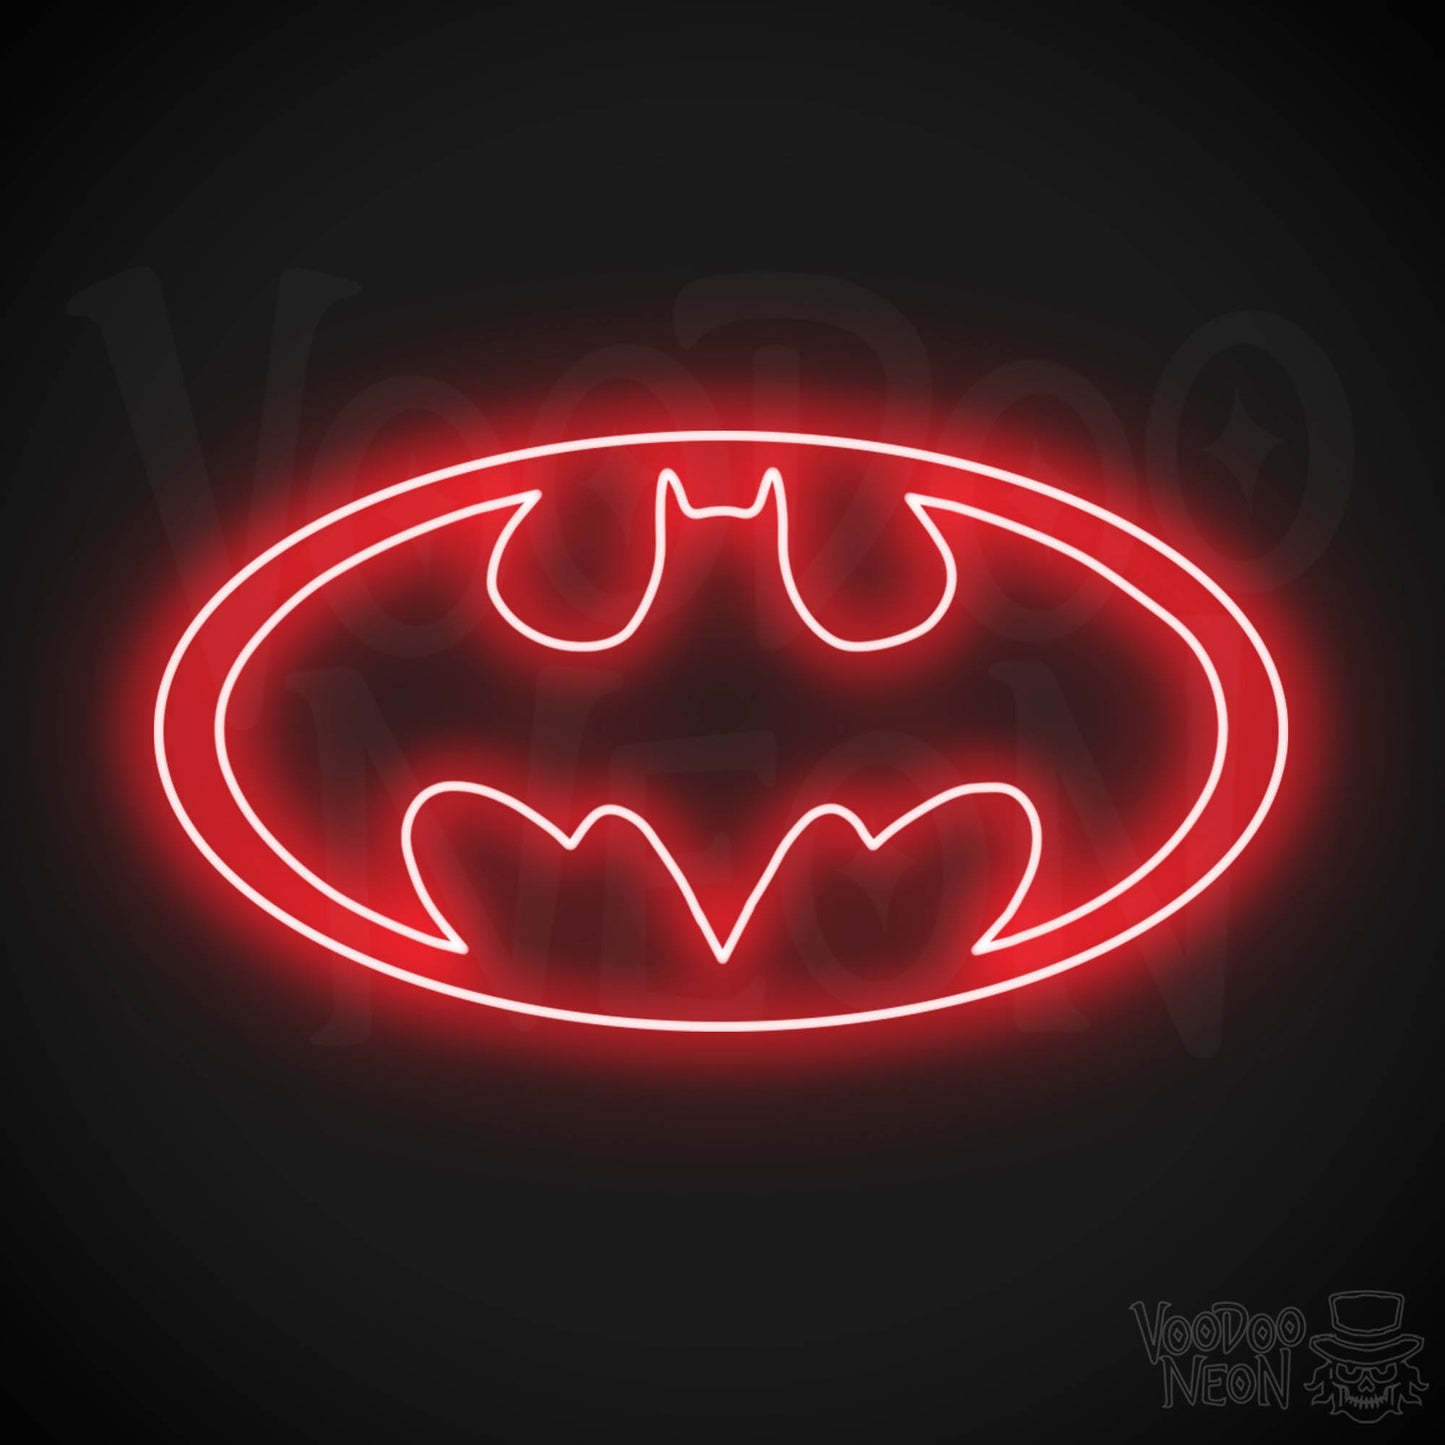 Batman Neon Sign - Batman Sign - Batman Light - Batman Symbol Wall Art - LED Sign - Color Red